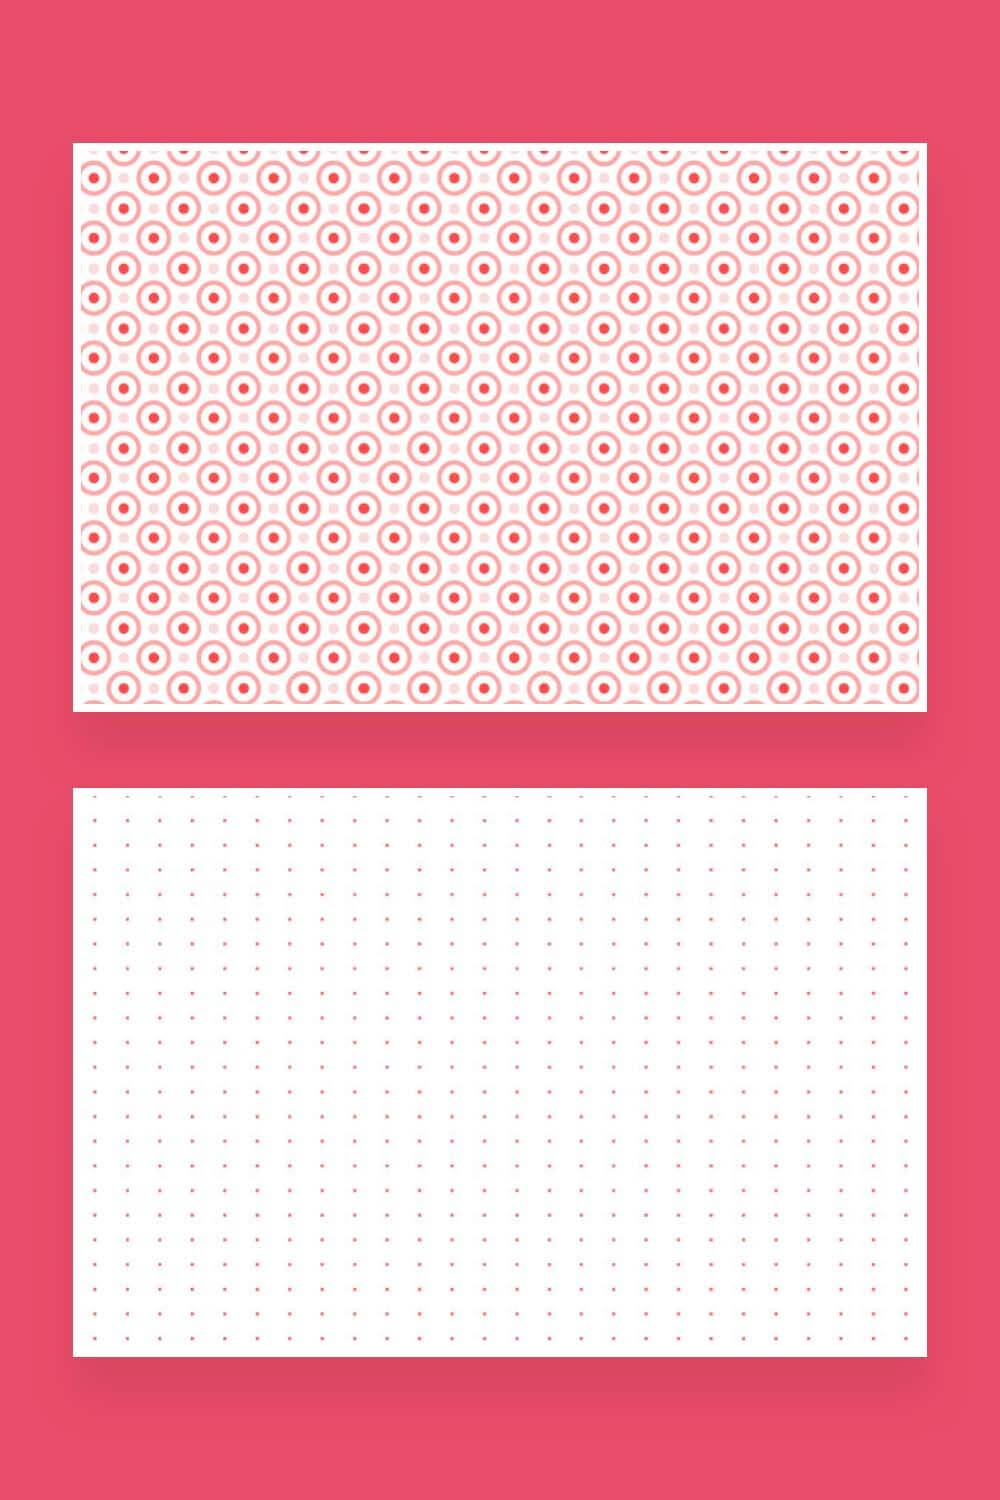 Two pink dotted seamless patterns of dots inside pale circles and small dots.